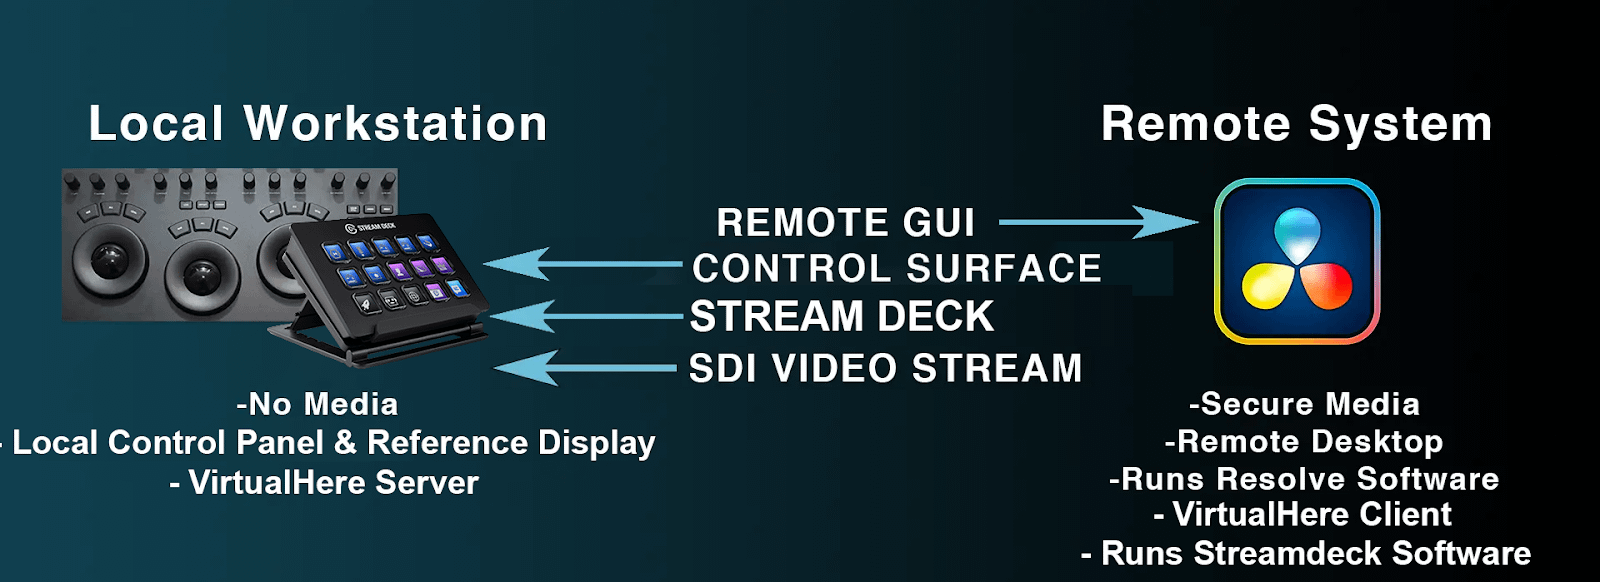 Signal flow for remote operation of a DaVinci Resolve system